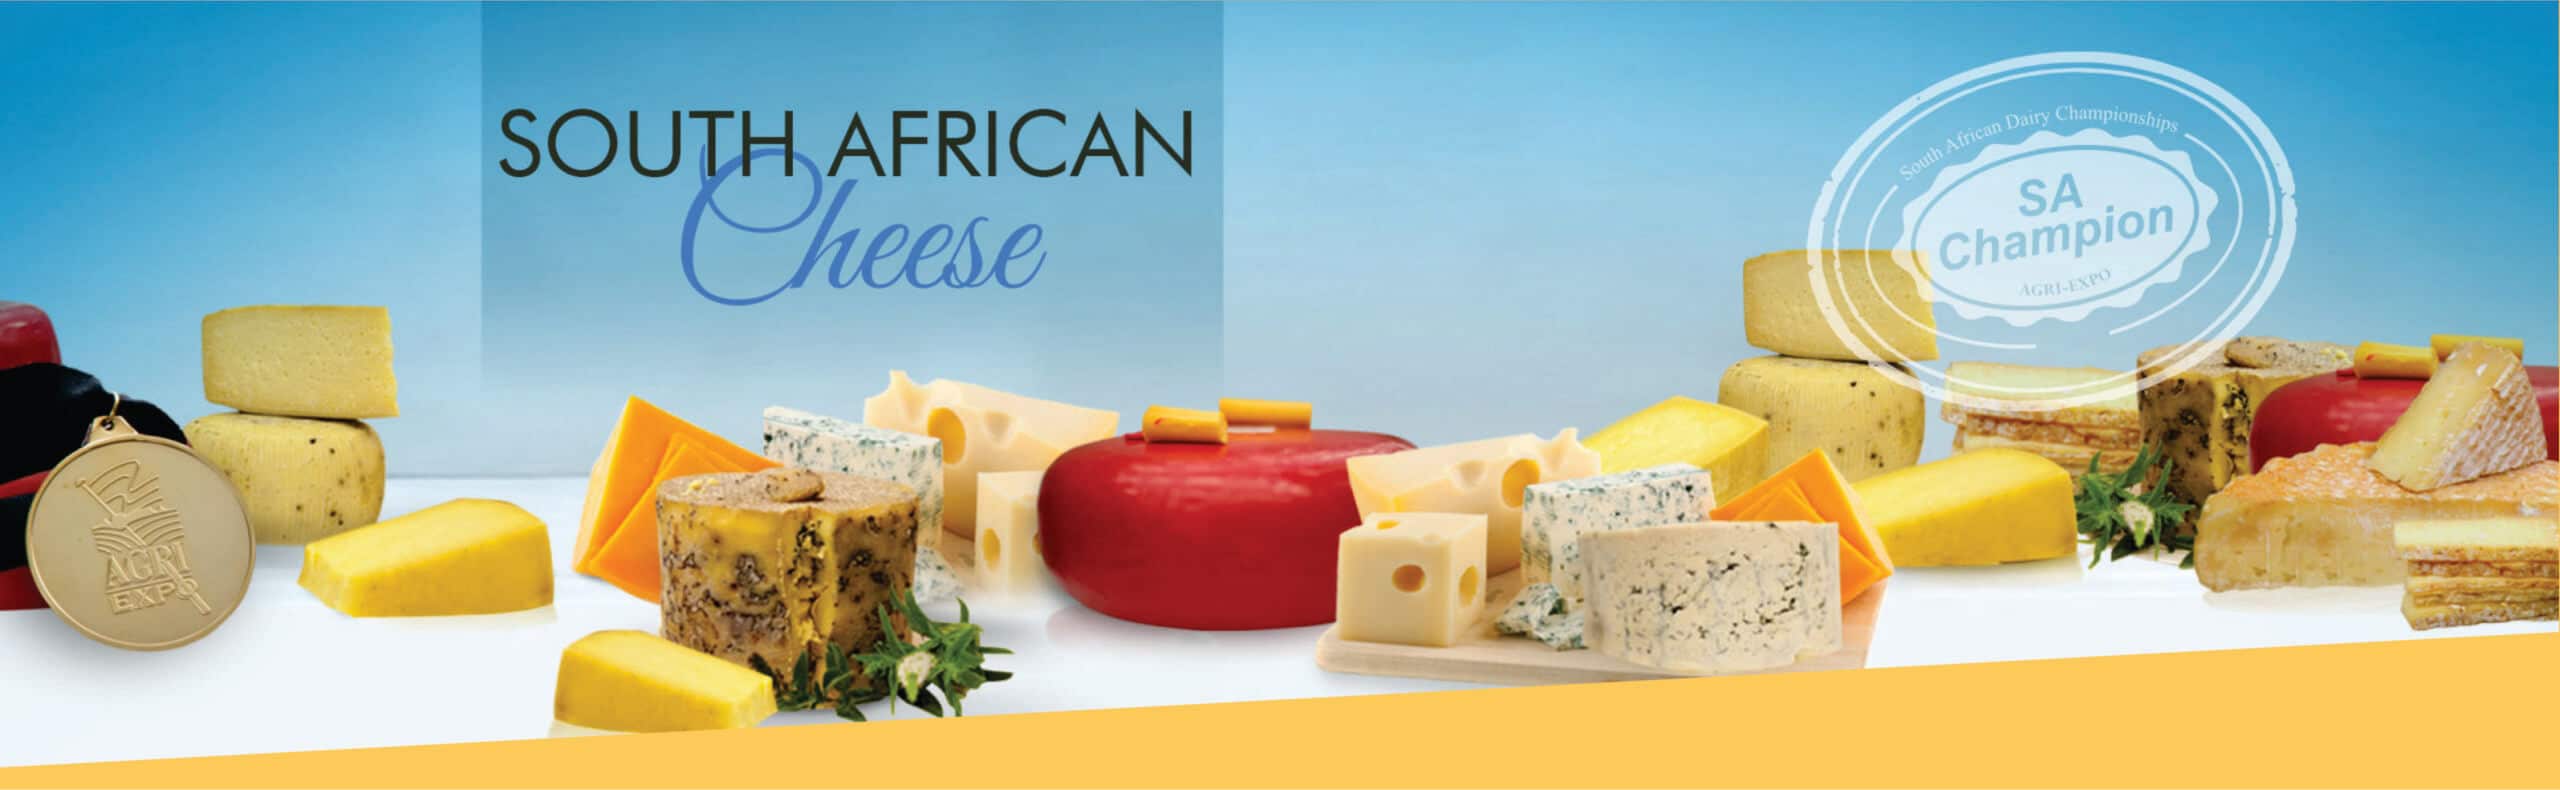 South African Cheese